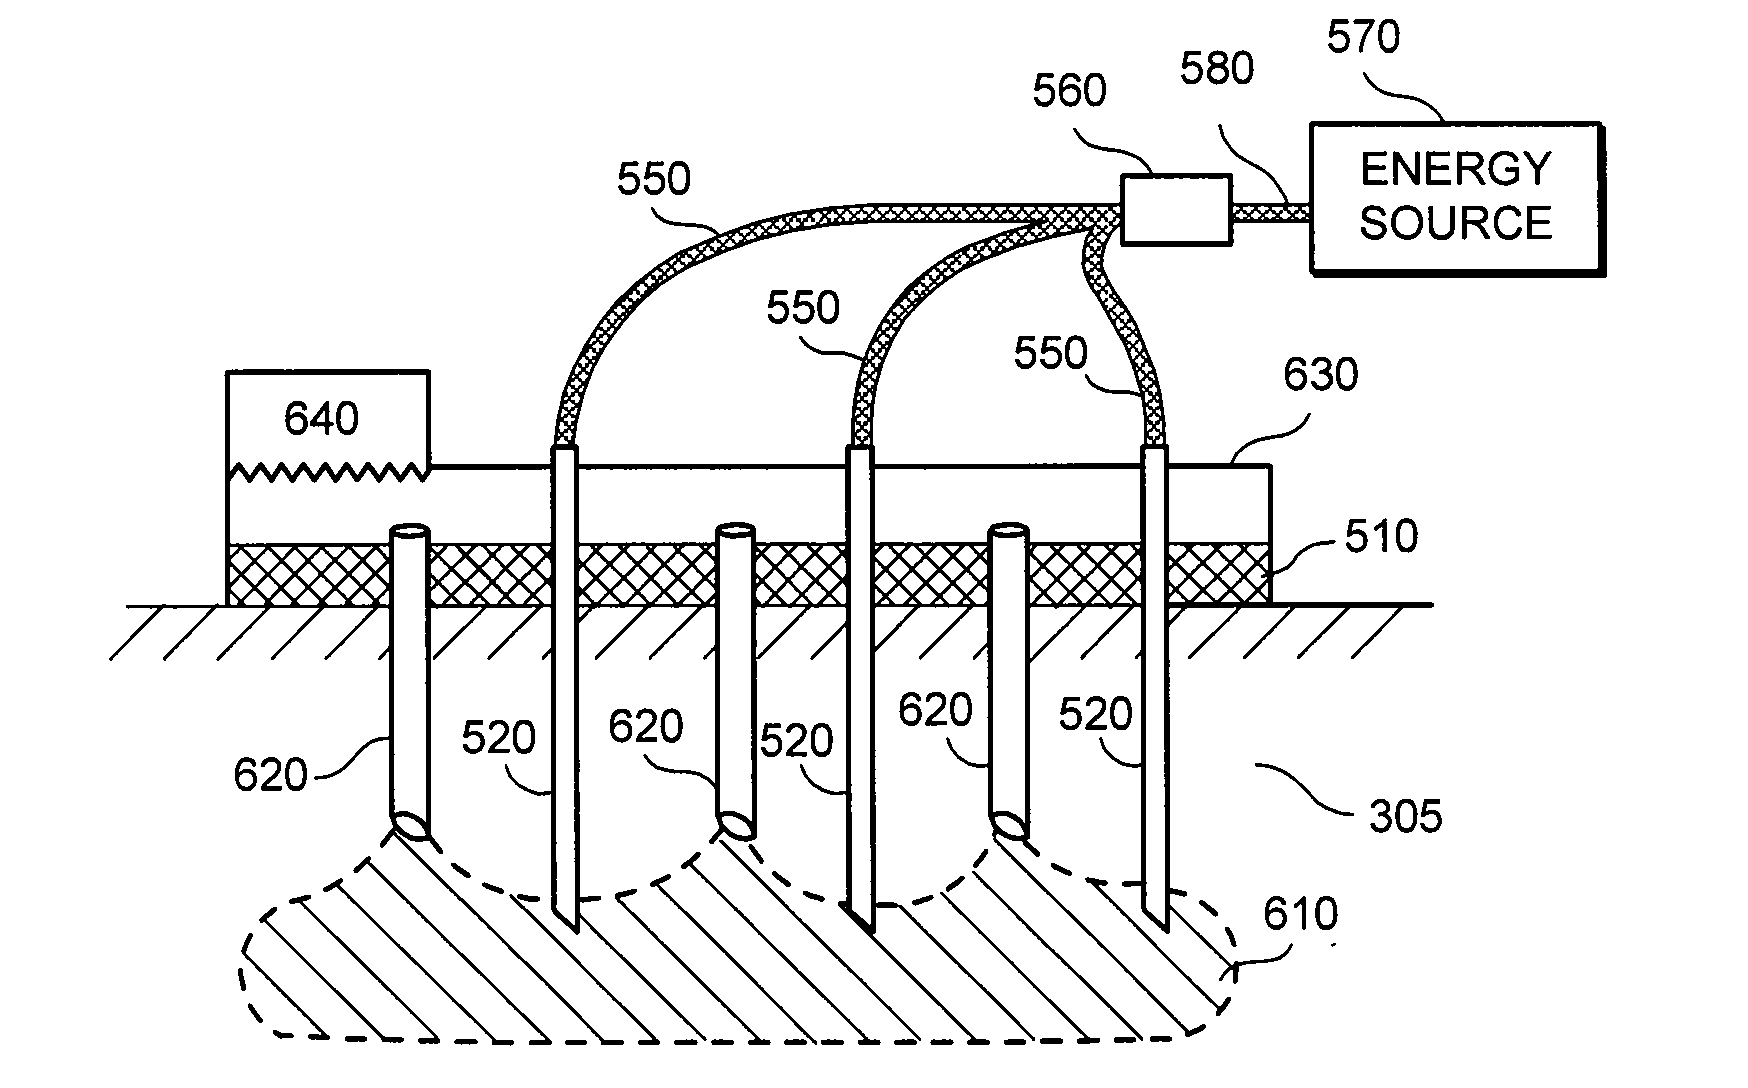 Method and apparatus for dermatological treatment and tissue reshaping